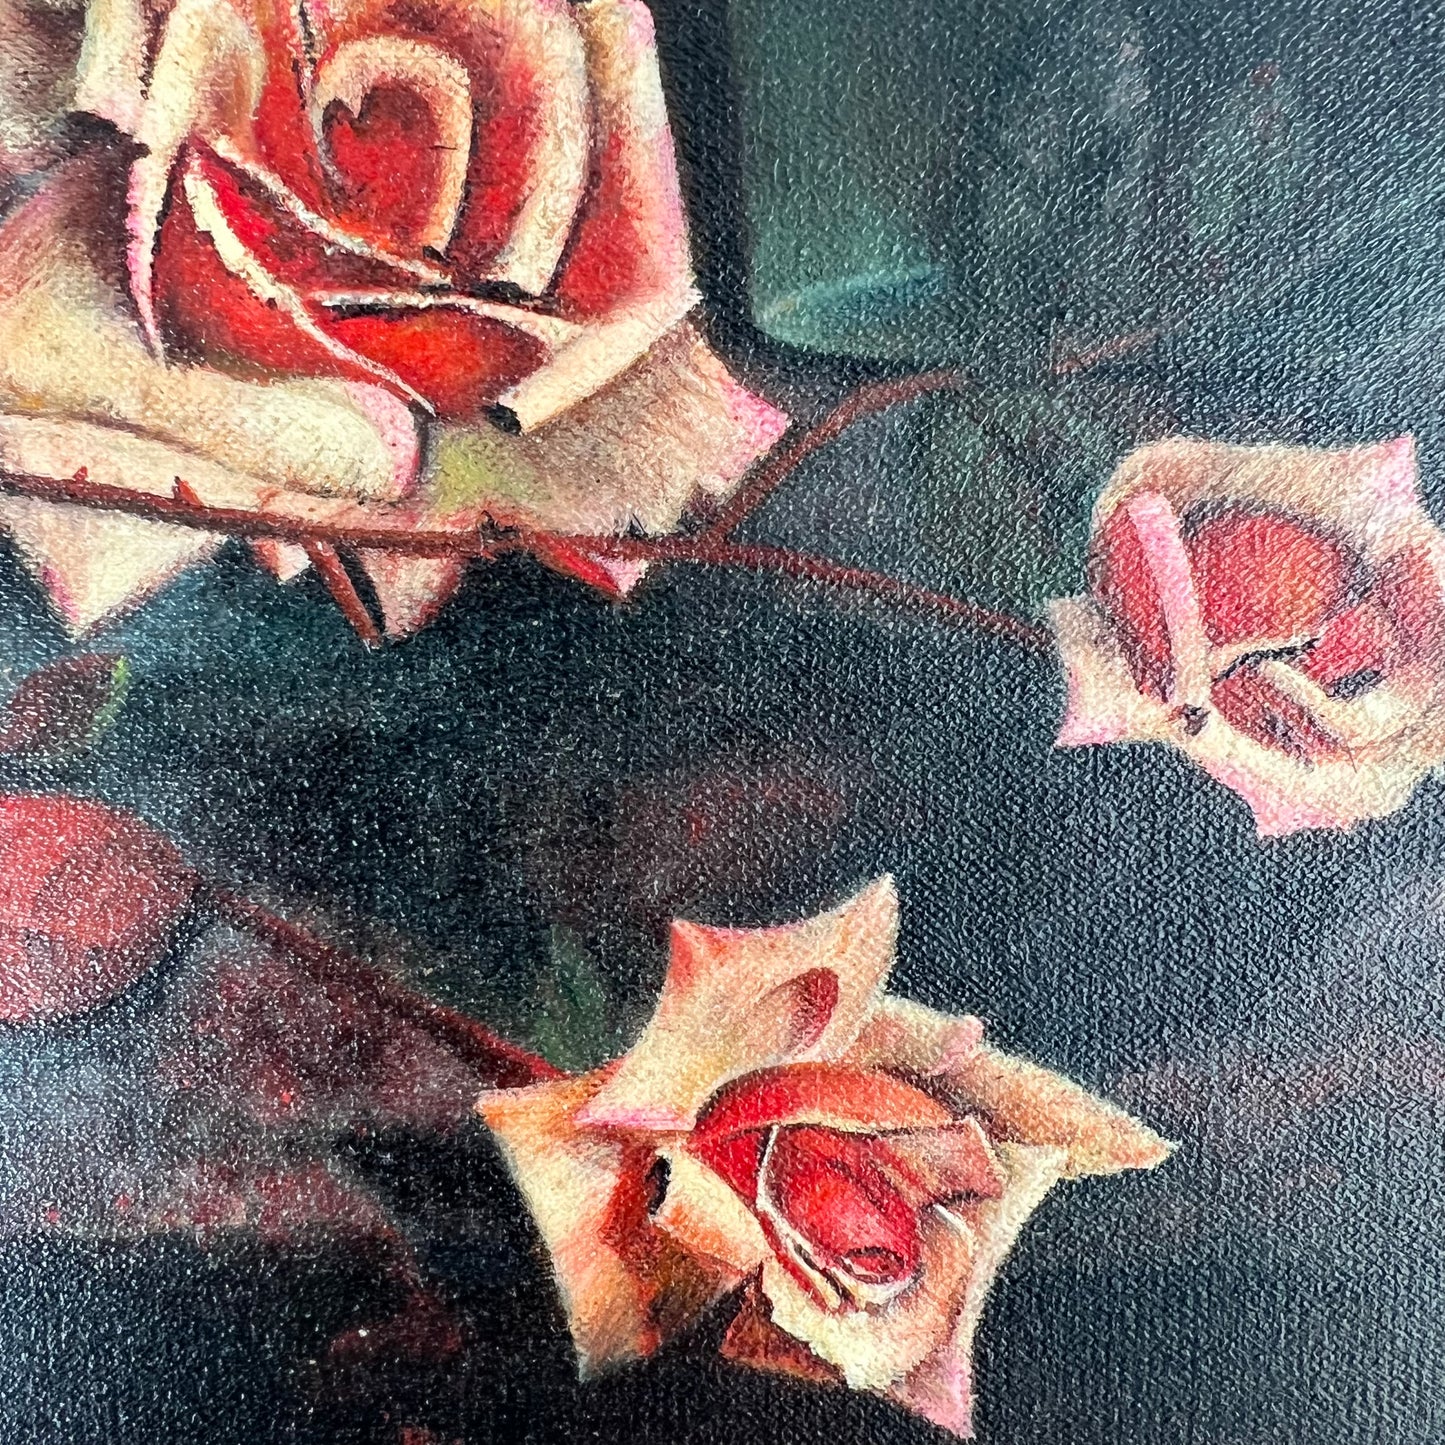 Vintage Oil Painting Still Life Moody Pink Roses & Red Geraniums